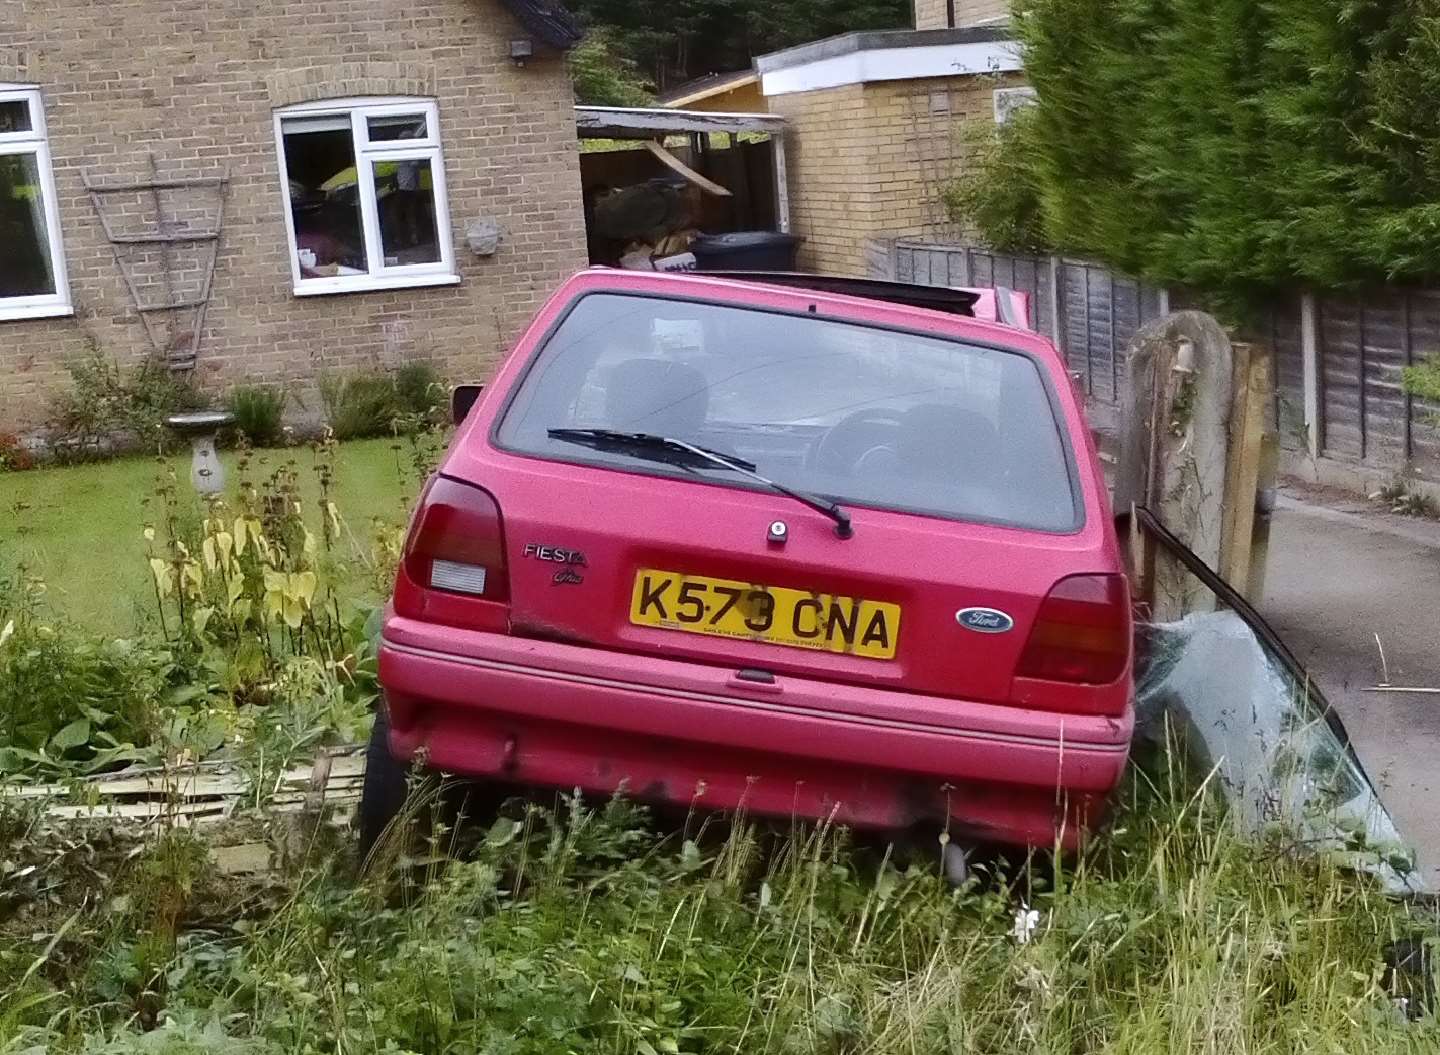 The car came to rest in a garden